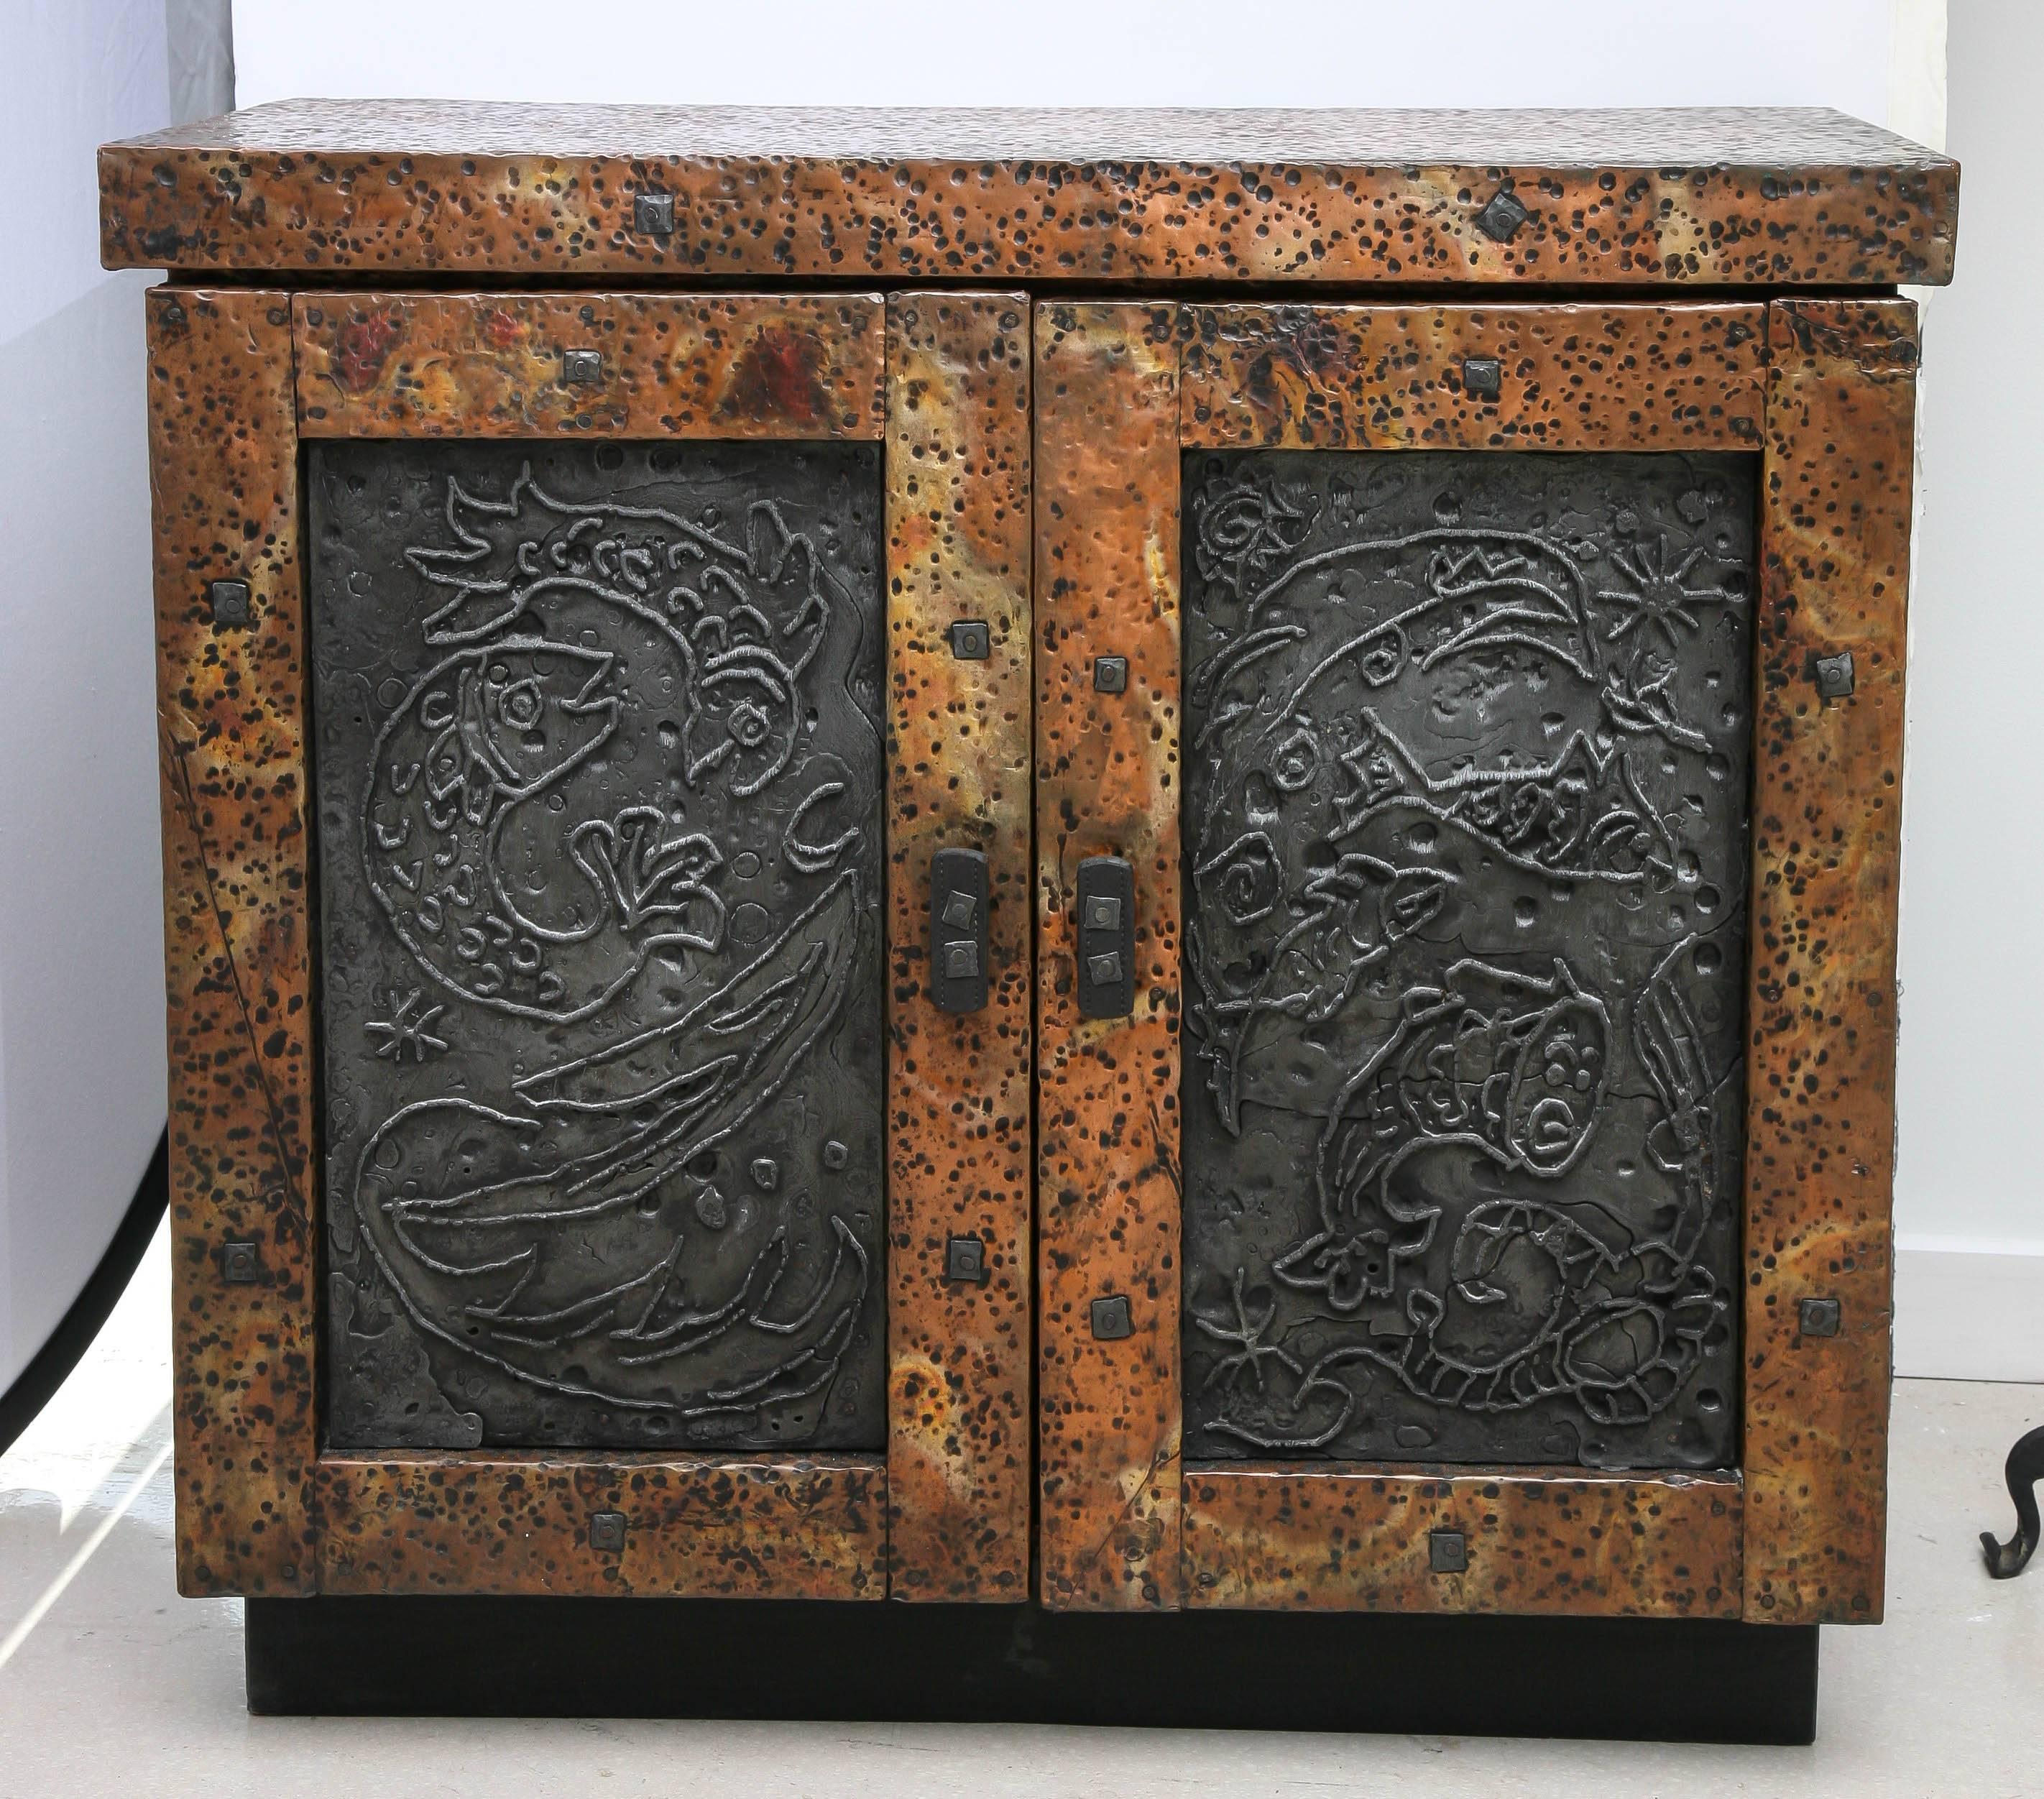 Vintage mixed metal hammered cabinet by the Arenson studio- a father and son duo active in Florida in the 1970s. The Brutalist cabinet has double doors which open to reveal a single shelf. The piece is signed.